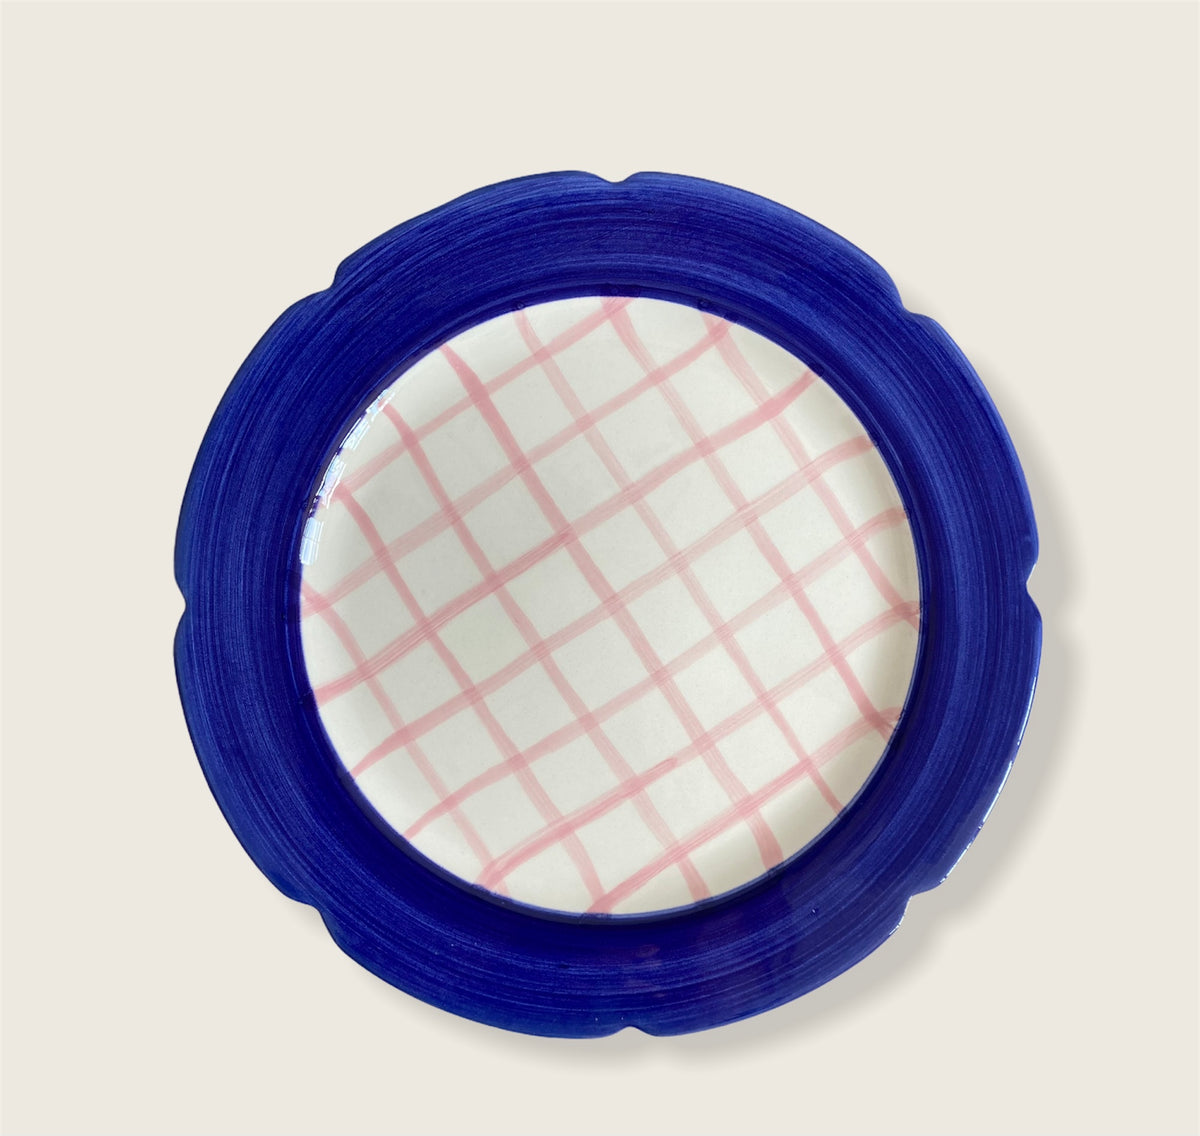 Hot Cakes Cake Stand in Navy & Pink Gingham